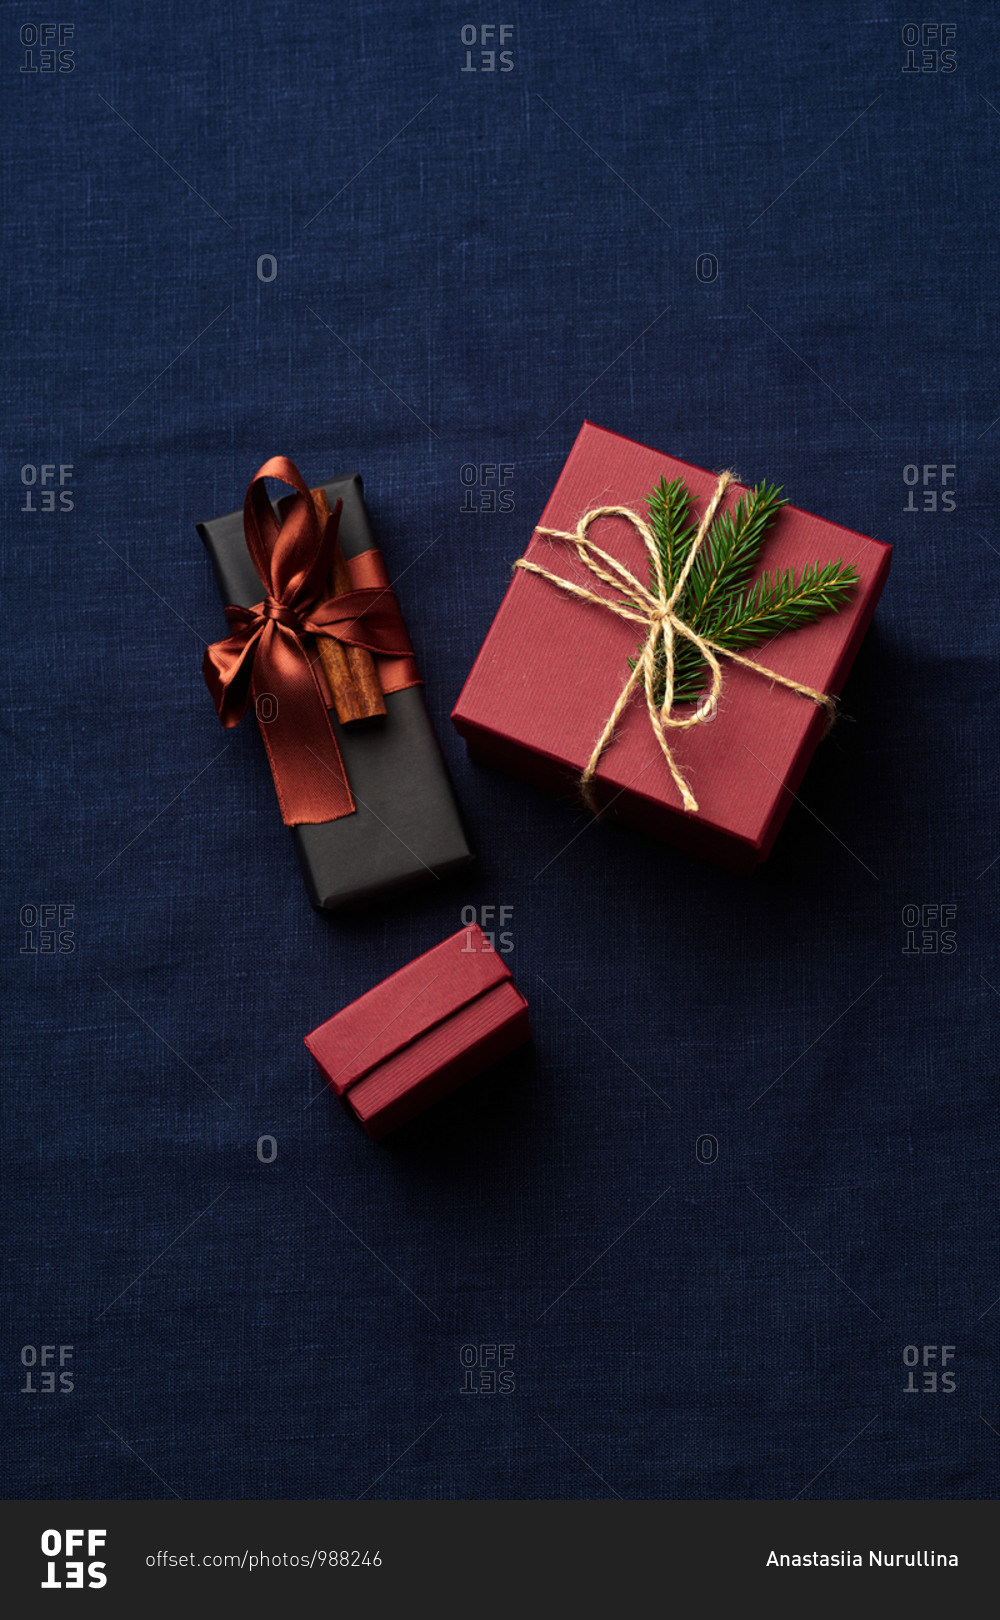 Top view of wrapped and decorated gifts and boxes with presents on blue textile background